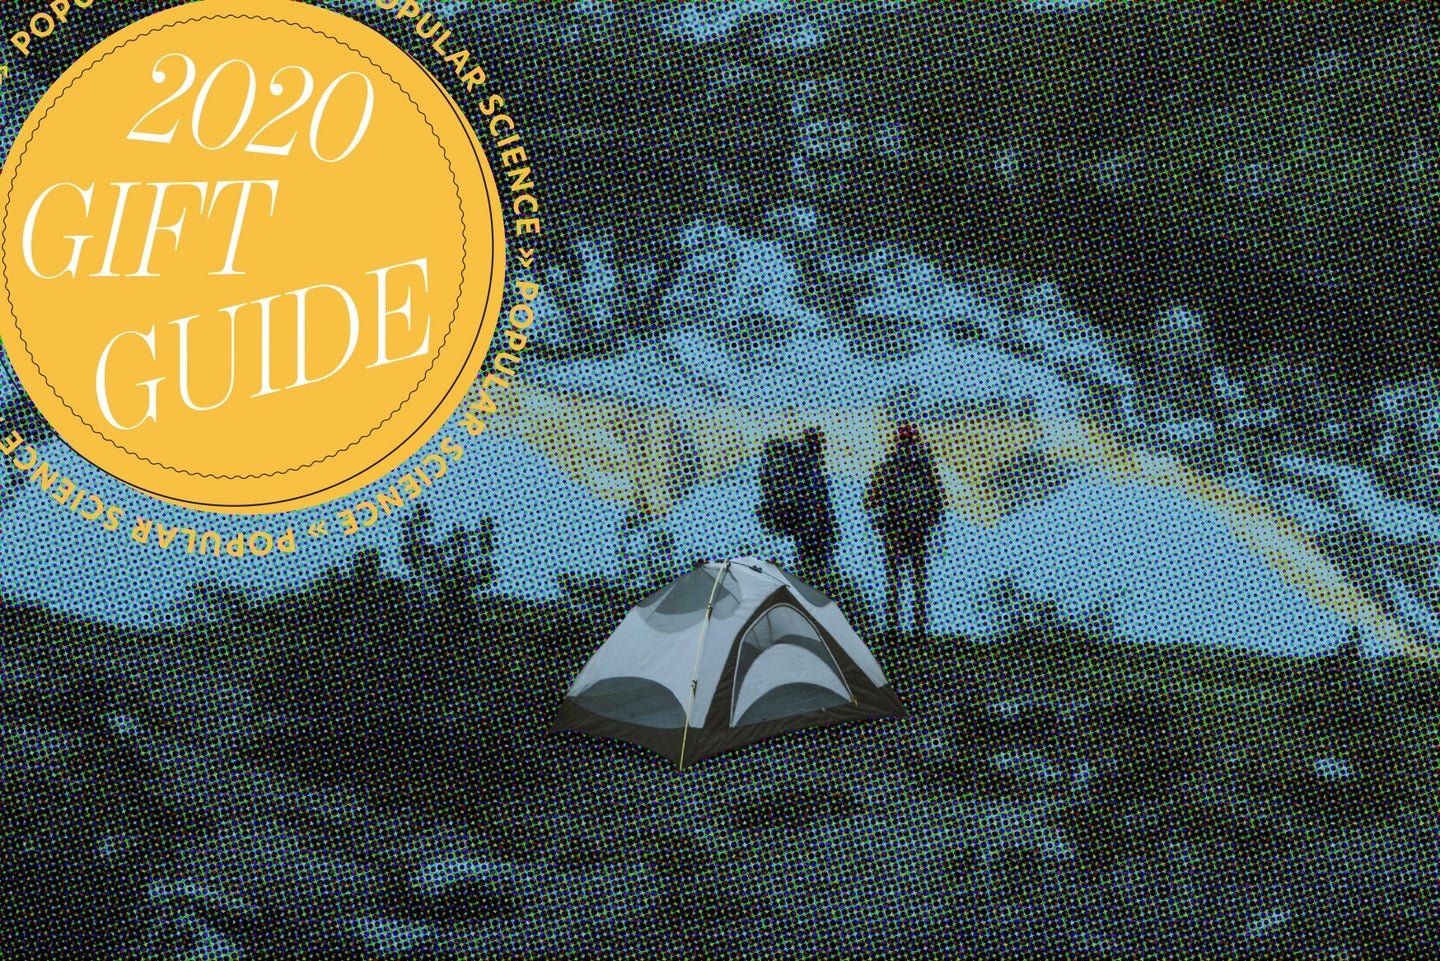 Go camping in style and comfort with these gifts